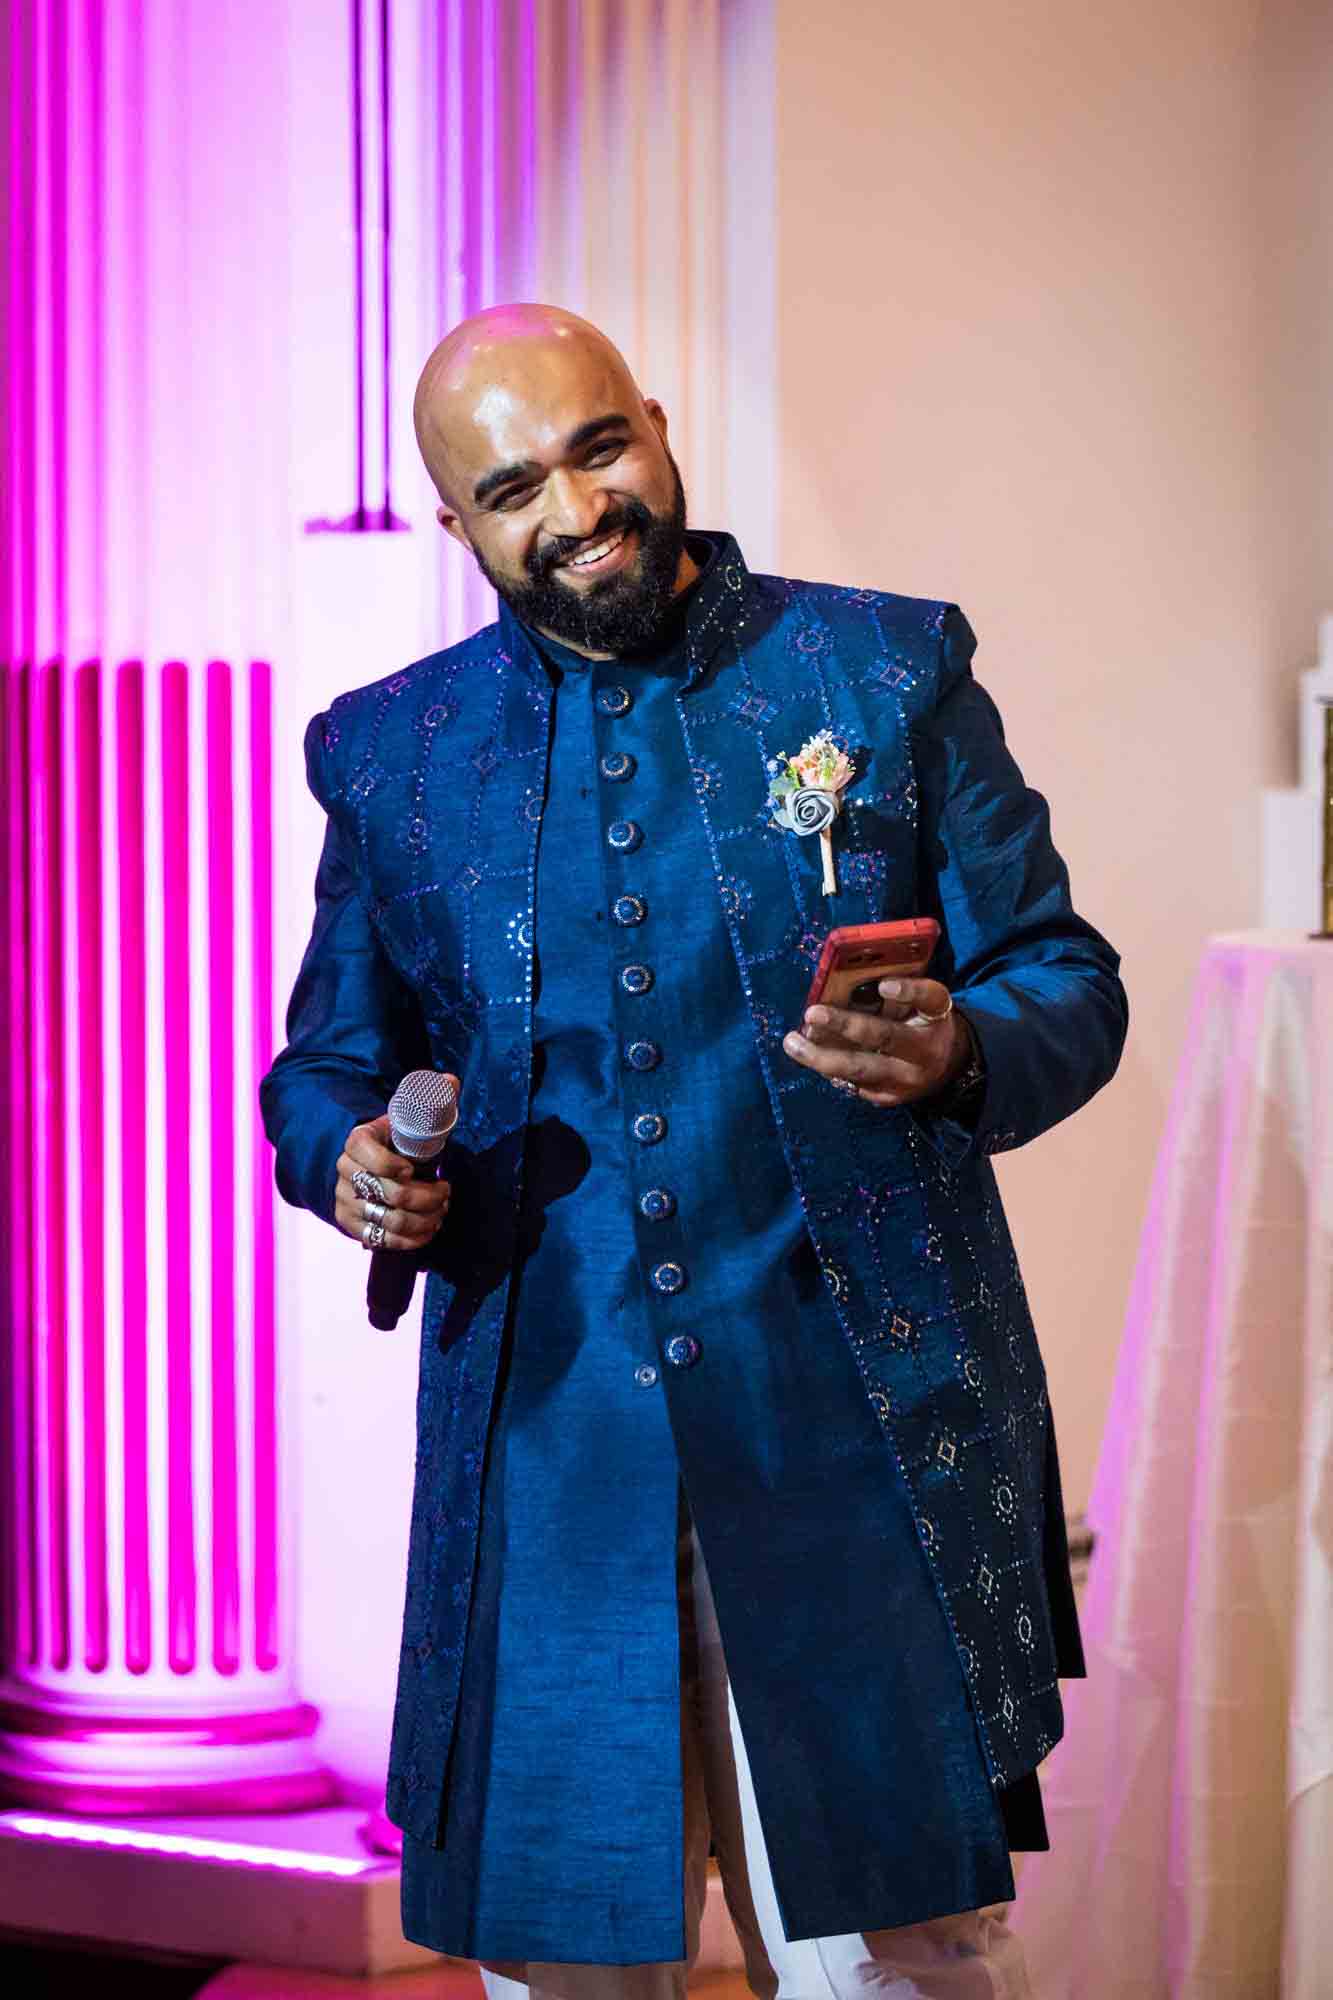 Bald groomsman wearing blue tunic holding microphone and cell phone during speech for an article on Terrace on the Park wedding photo tips